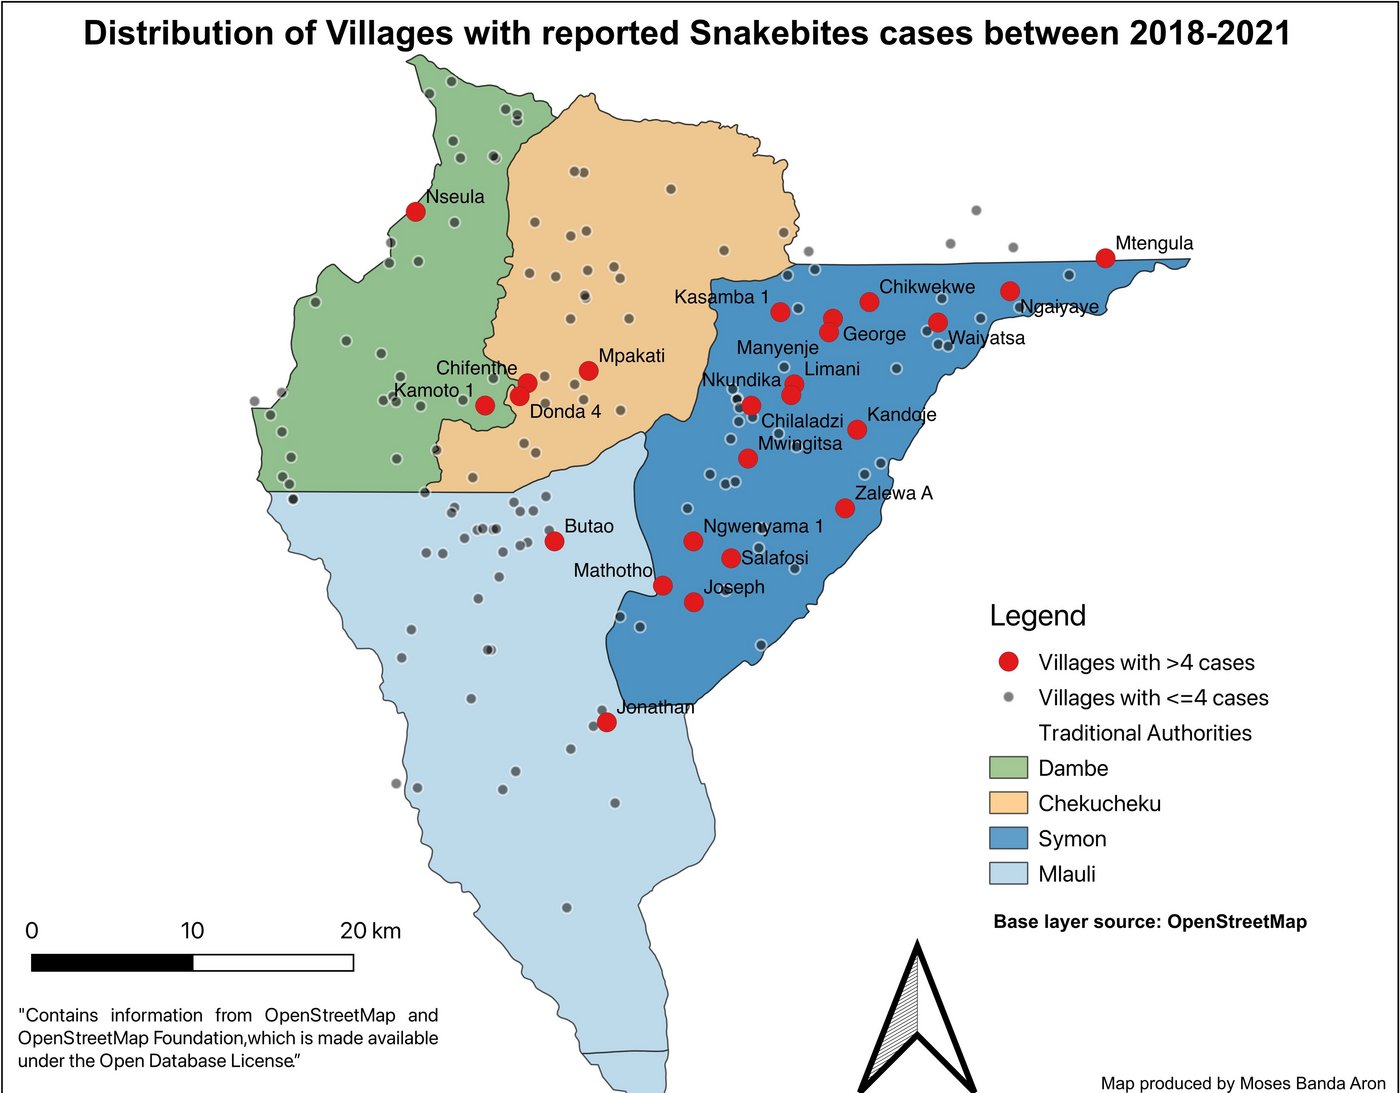 The map of Malawi shows the distribution of villages with reported snakebite cases between 2018 and 2021.